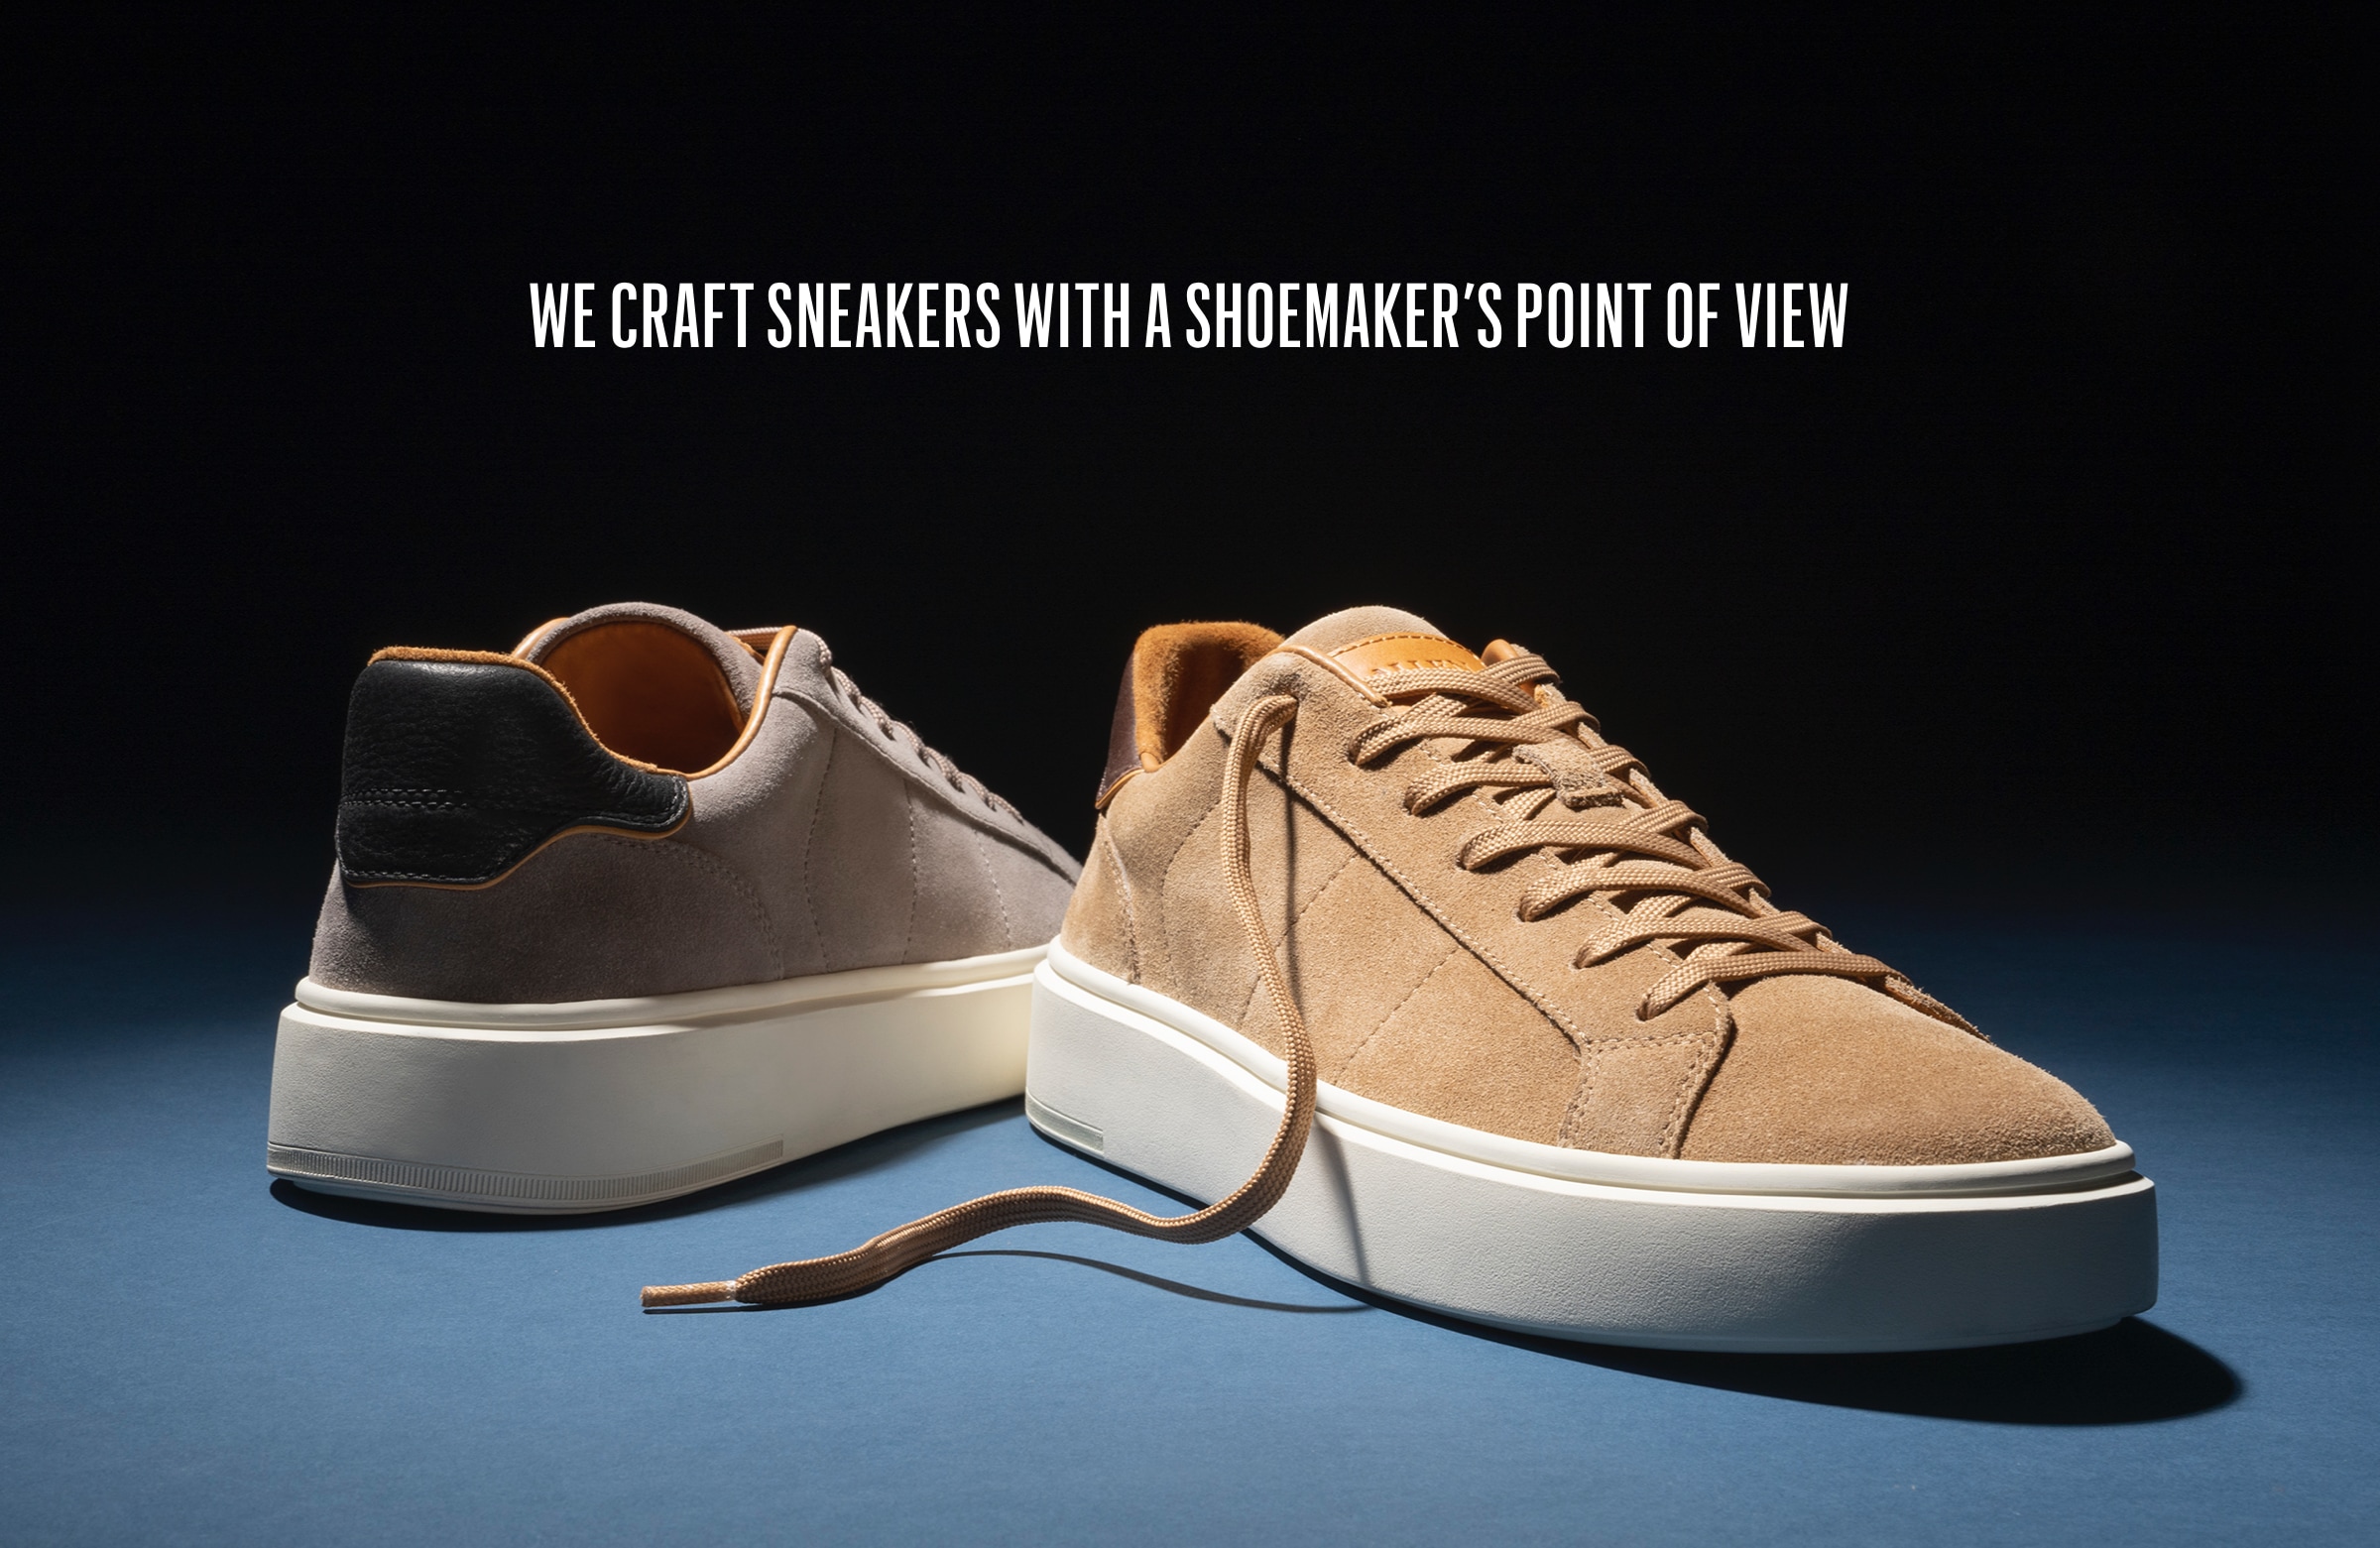 We craft sneakers with a shoemakers point of view